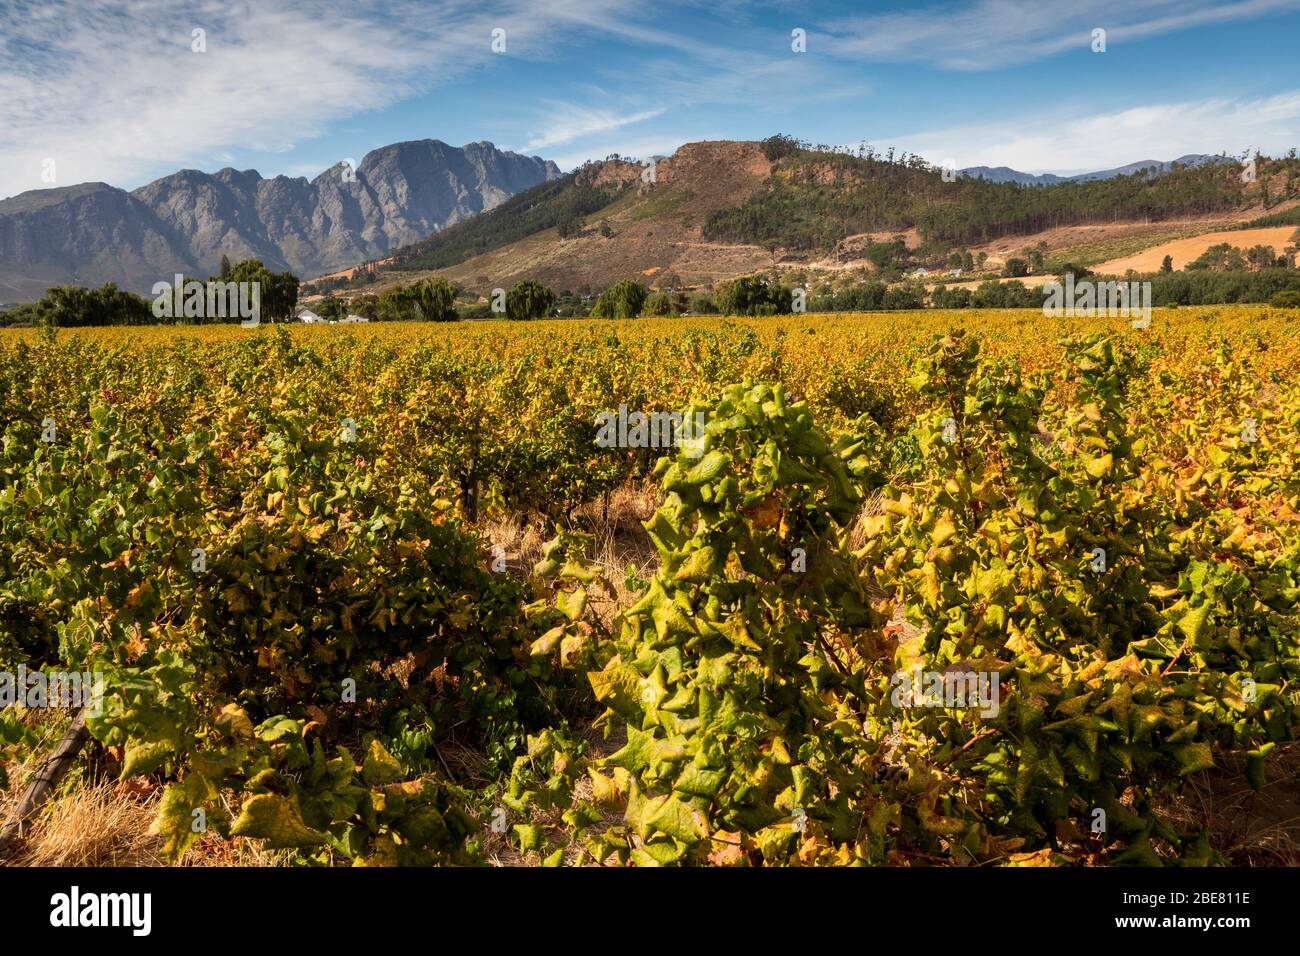 South Africa; Franschhoek; Rickety Bridge winery, grape vines, grapes growing on vine Stock Photo